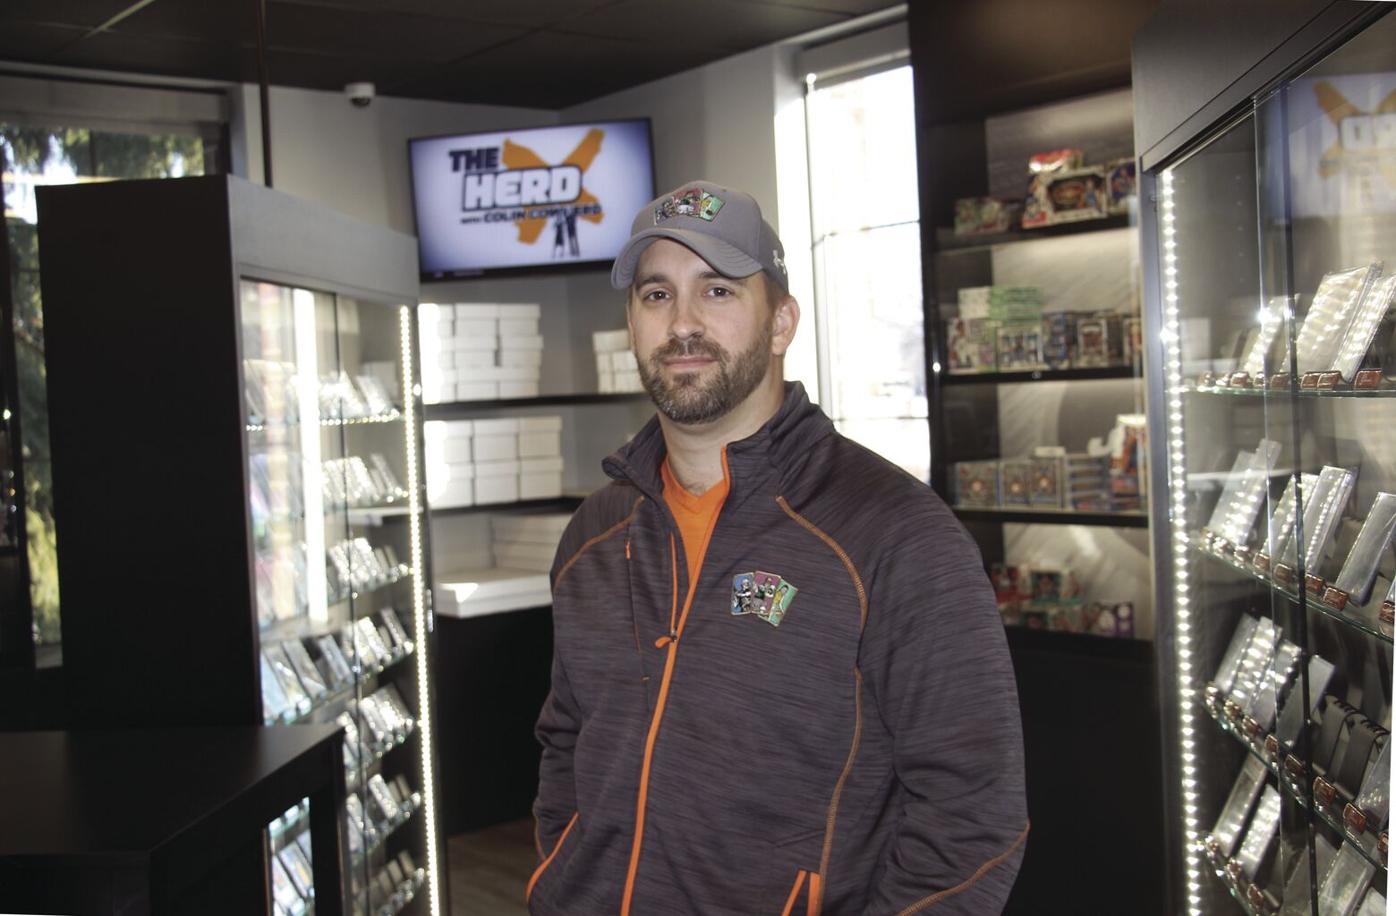 House of trading cards: How a hobby of card collecting turned into a successful Champlin business